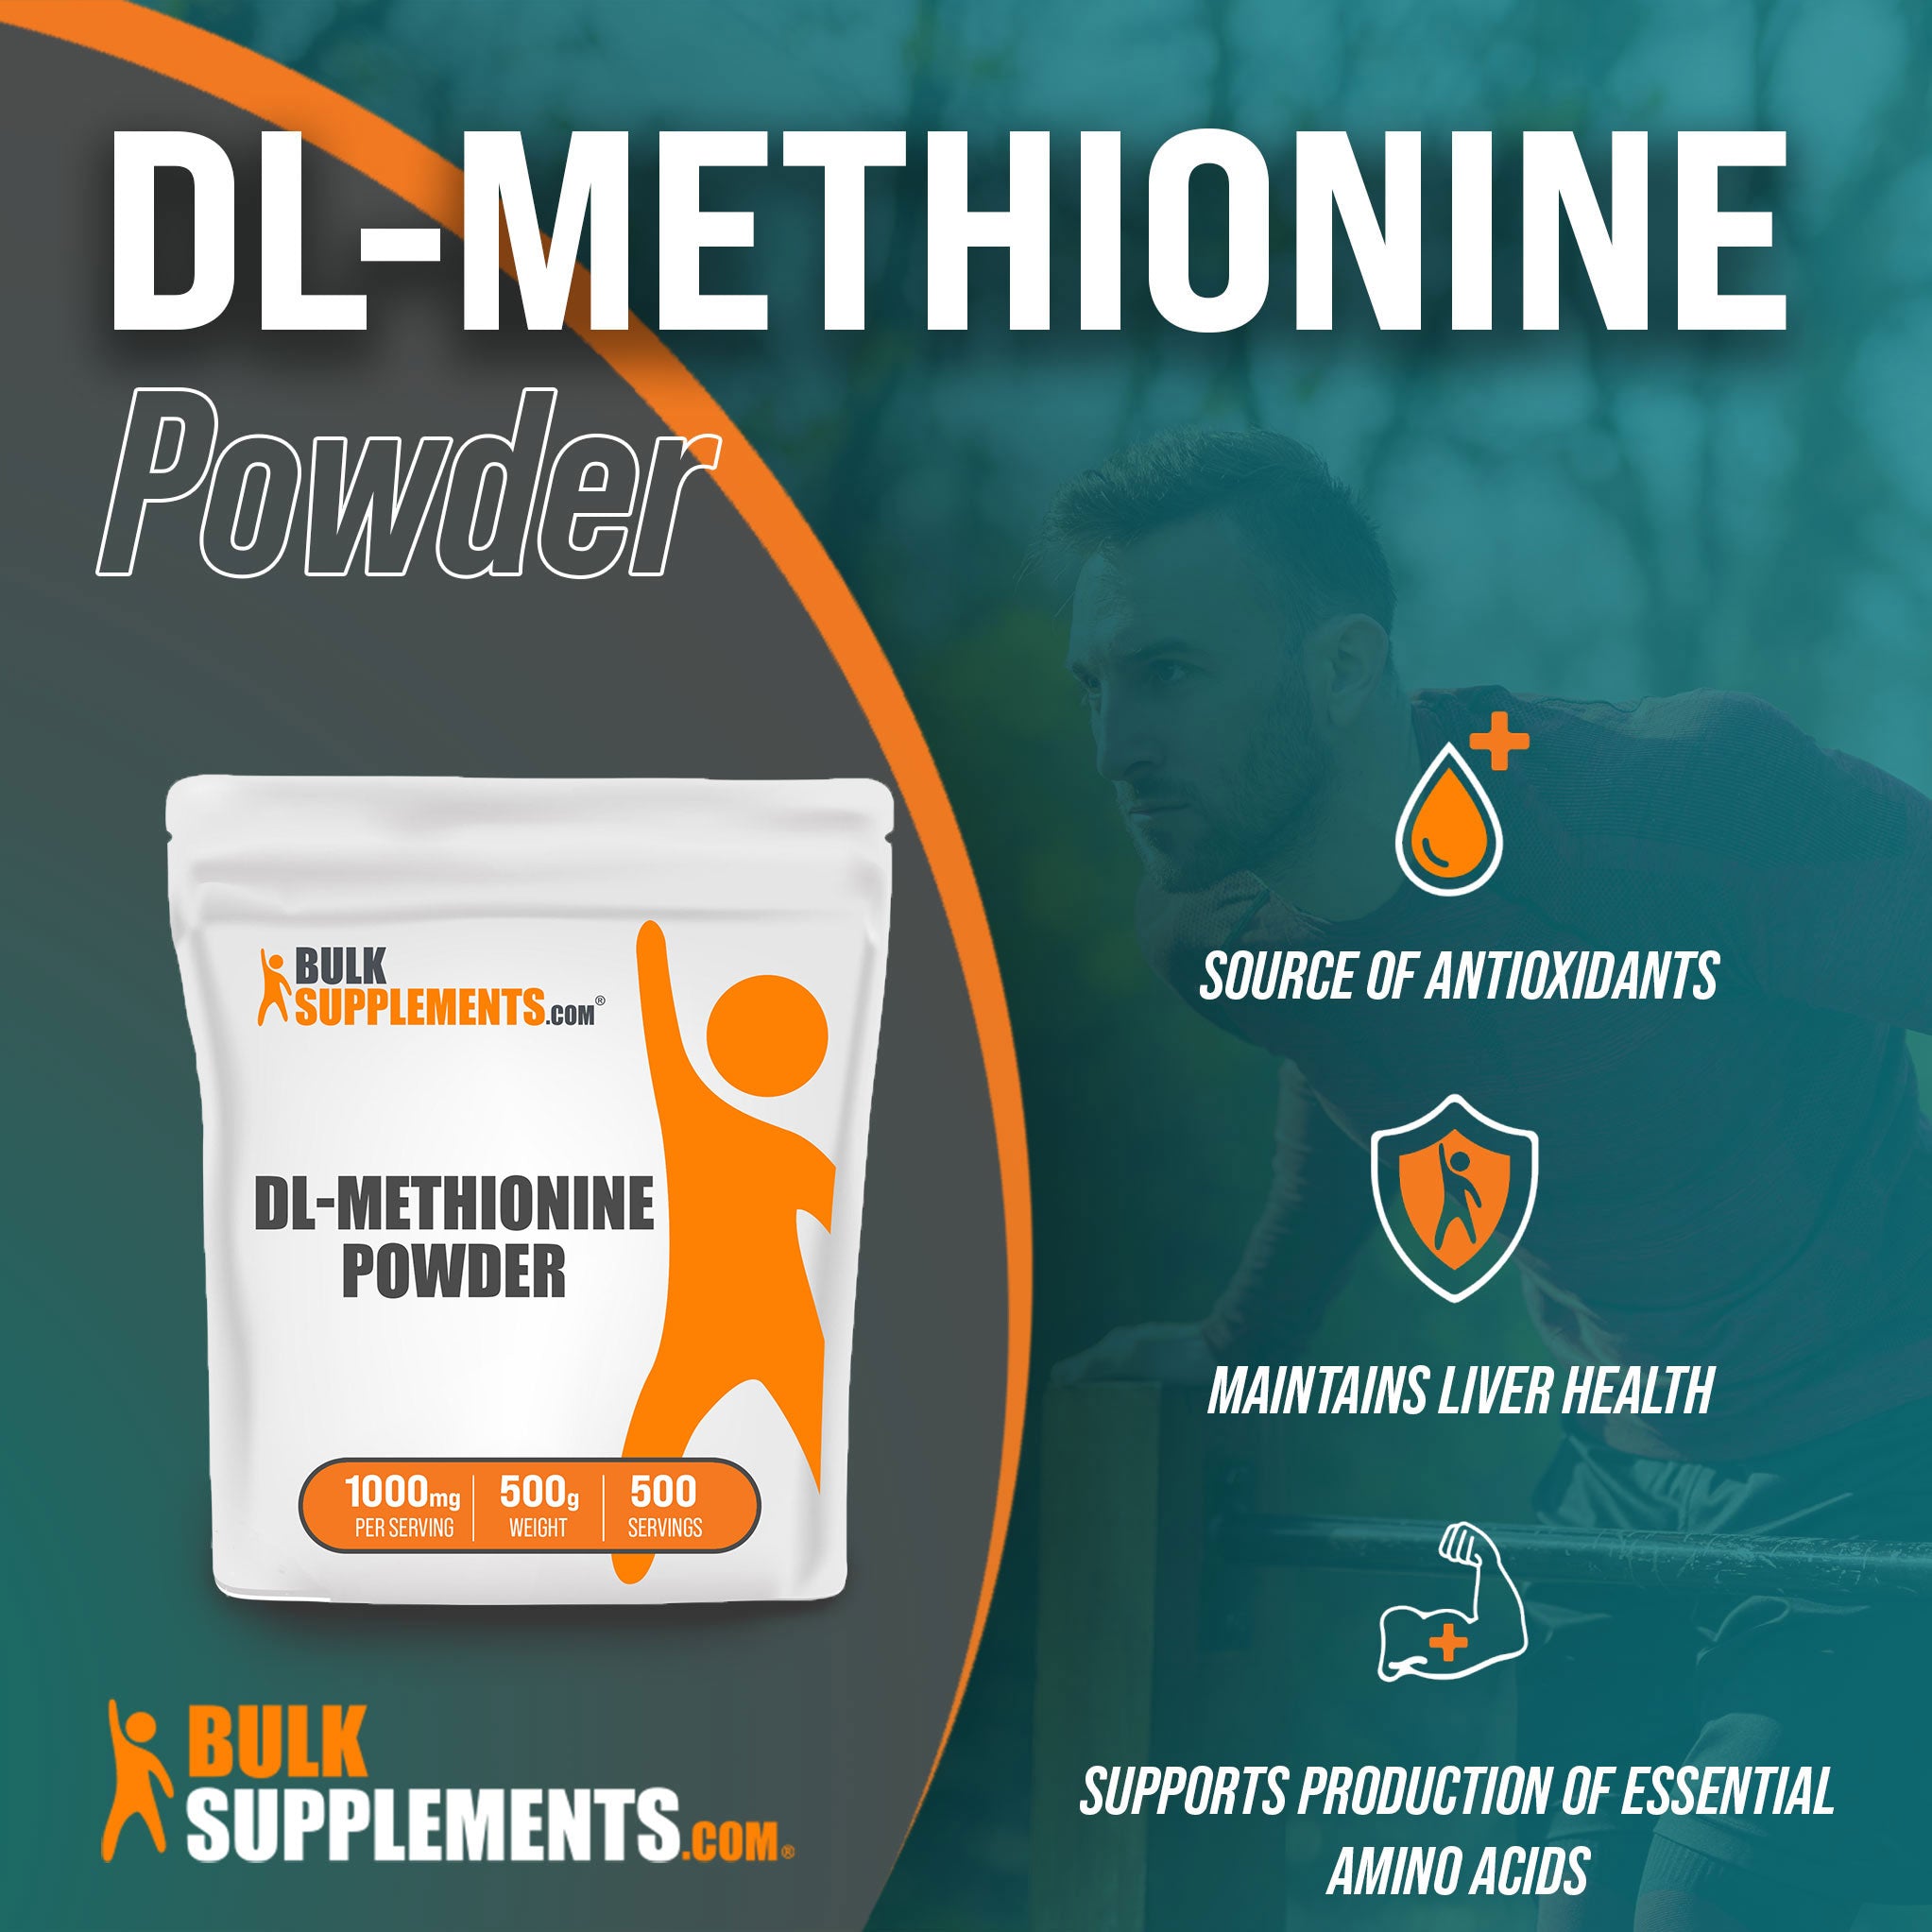 Benefits of DL-Methionine; source of antioxidants, maintains liver health, supports production of essential amino acids